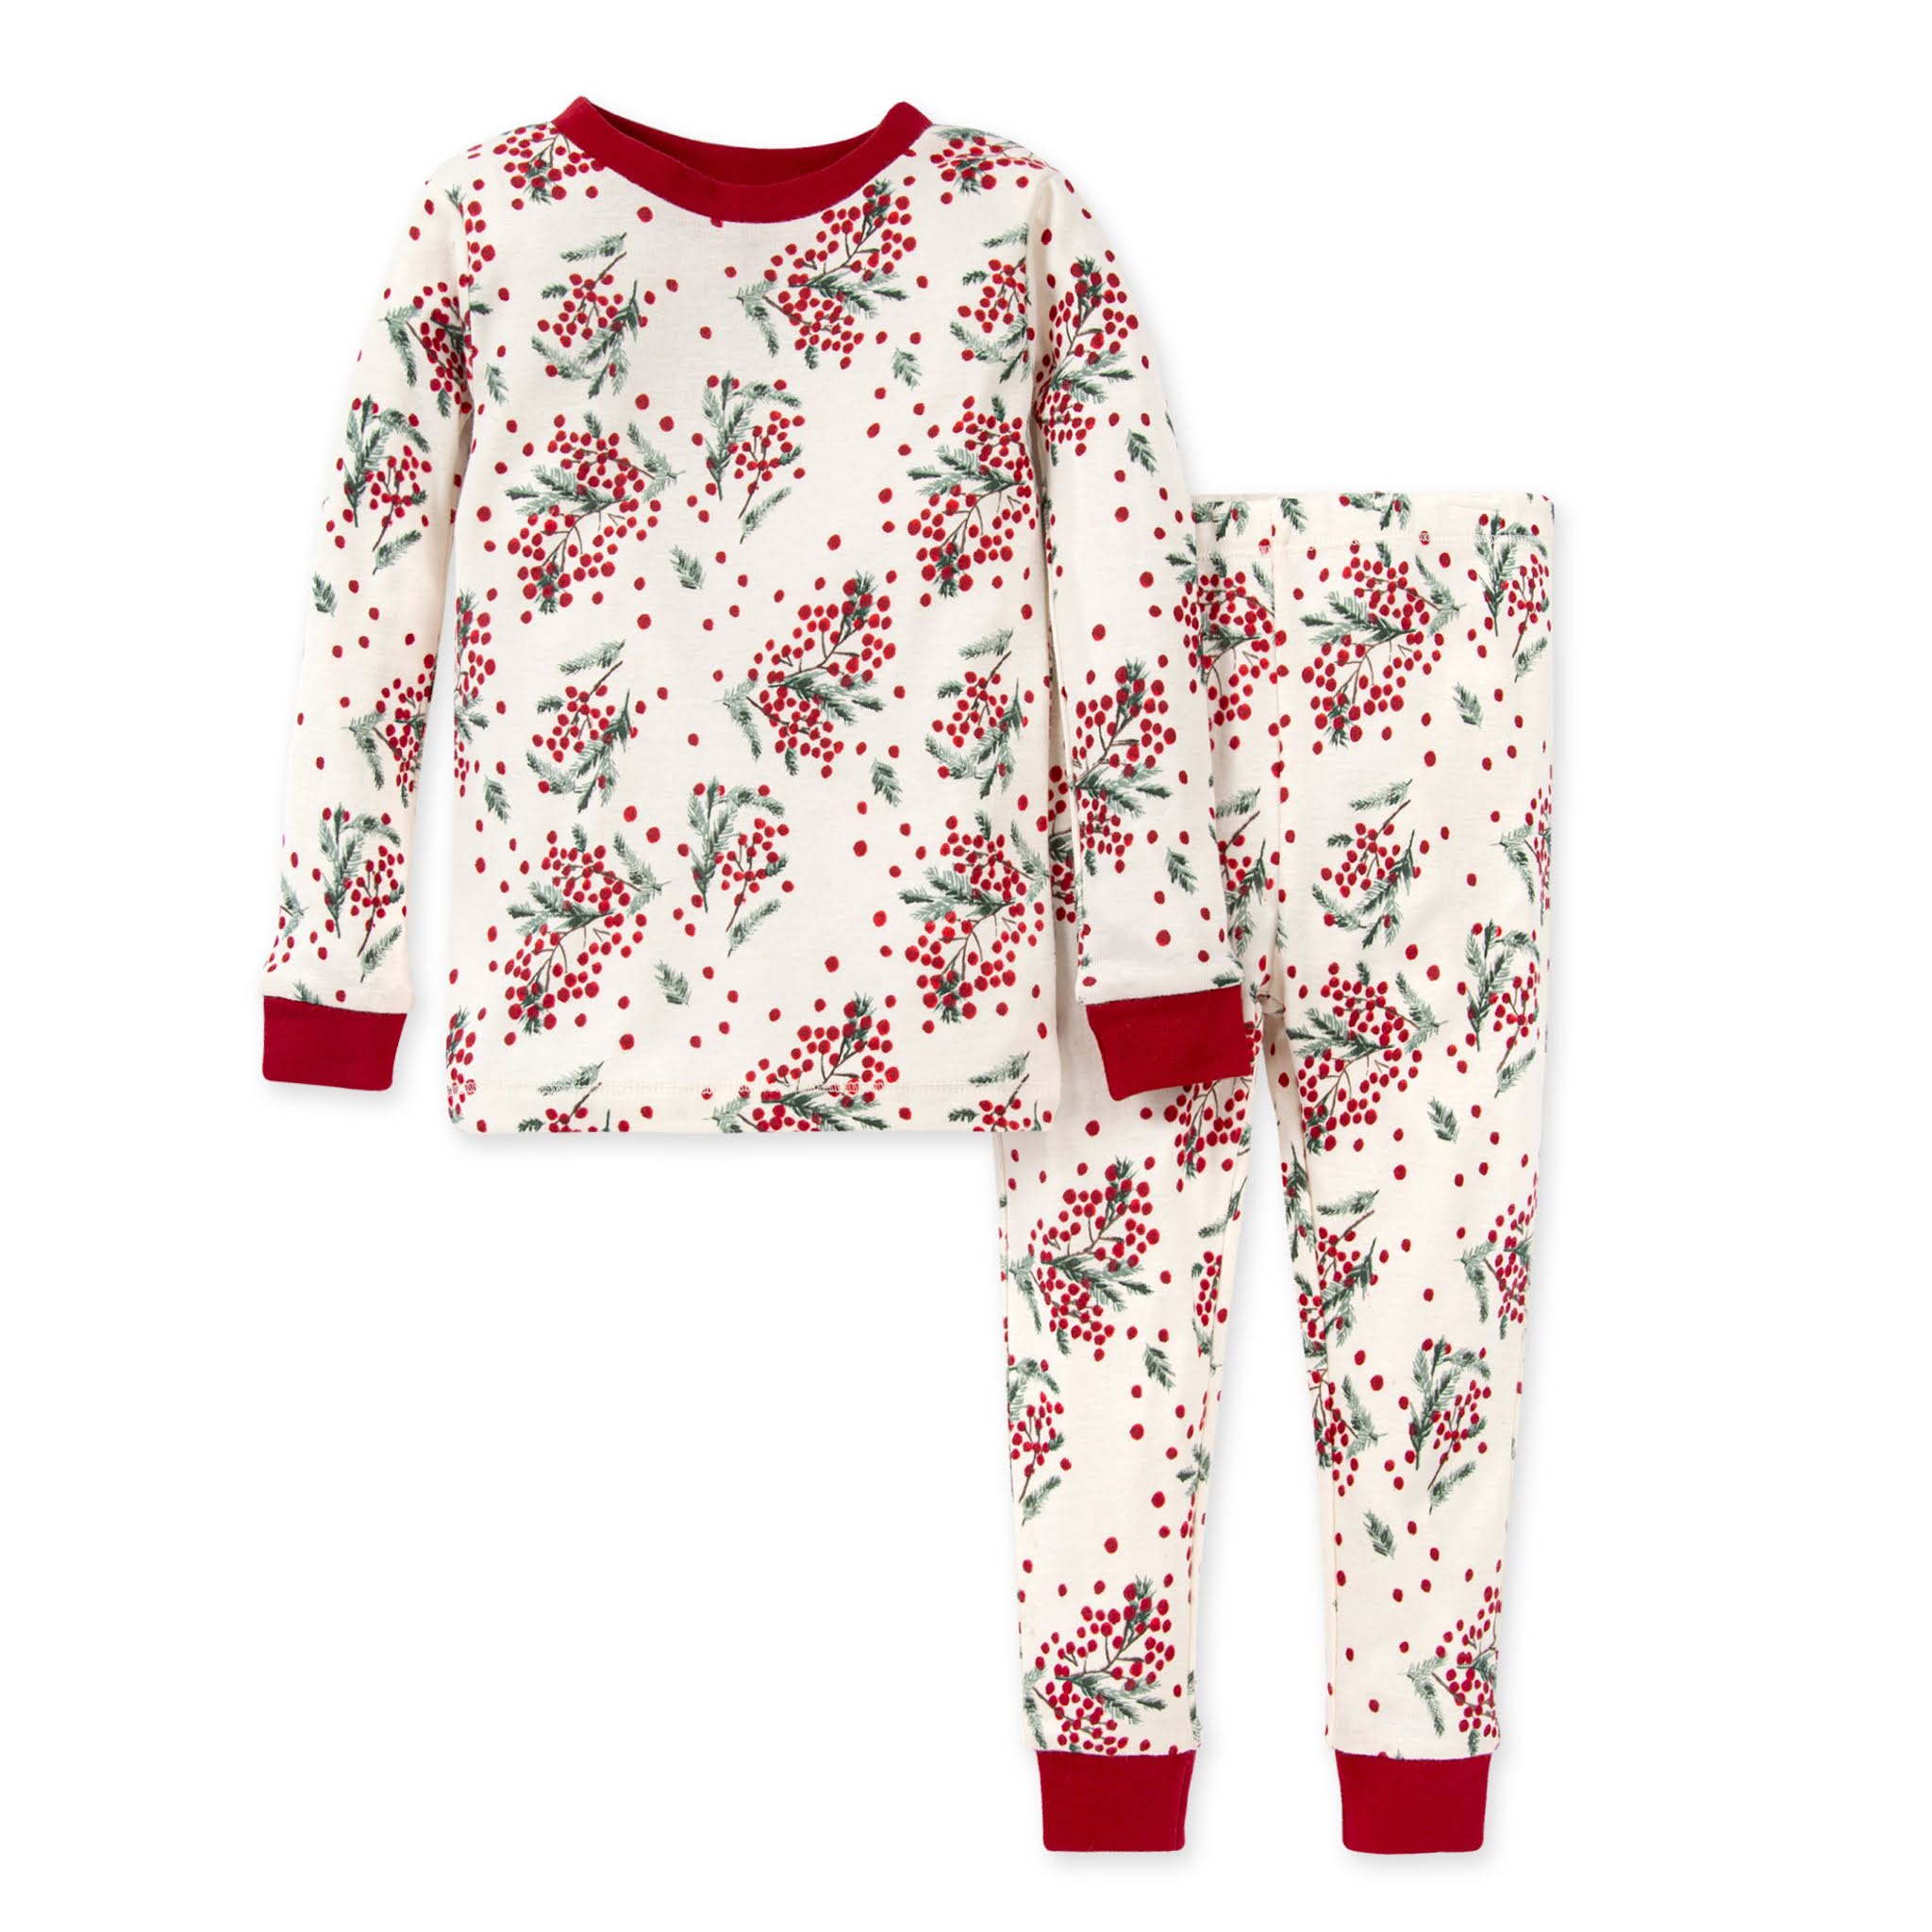 Toddler Berry Holiday Pajamas from Burt's Bees Baby